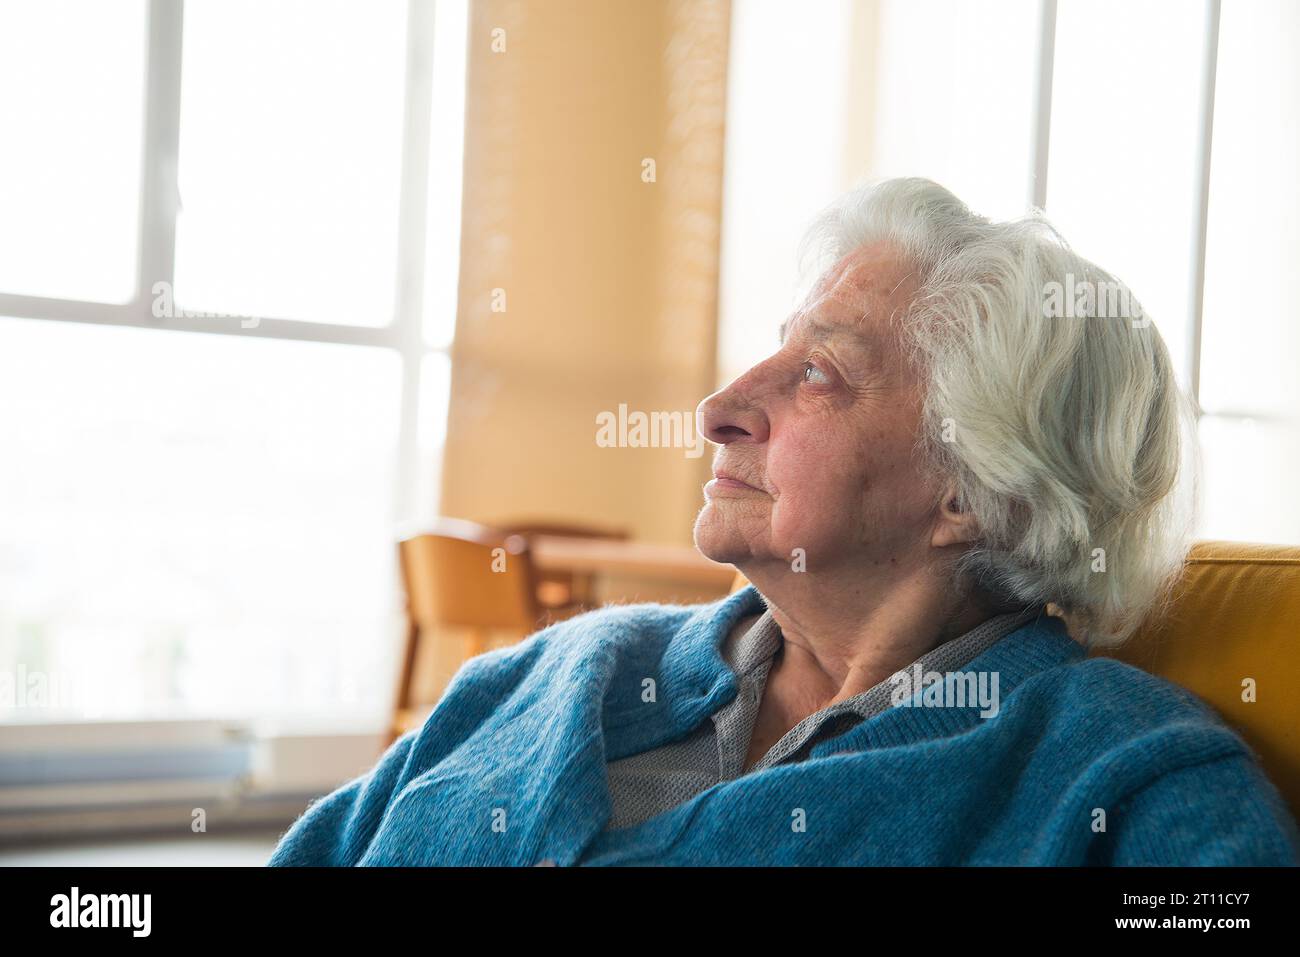 Profile portrait of old woman in a nursing home. Stock Photo